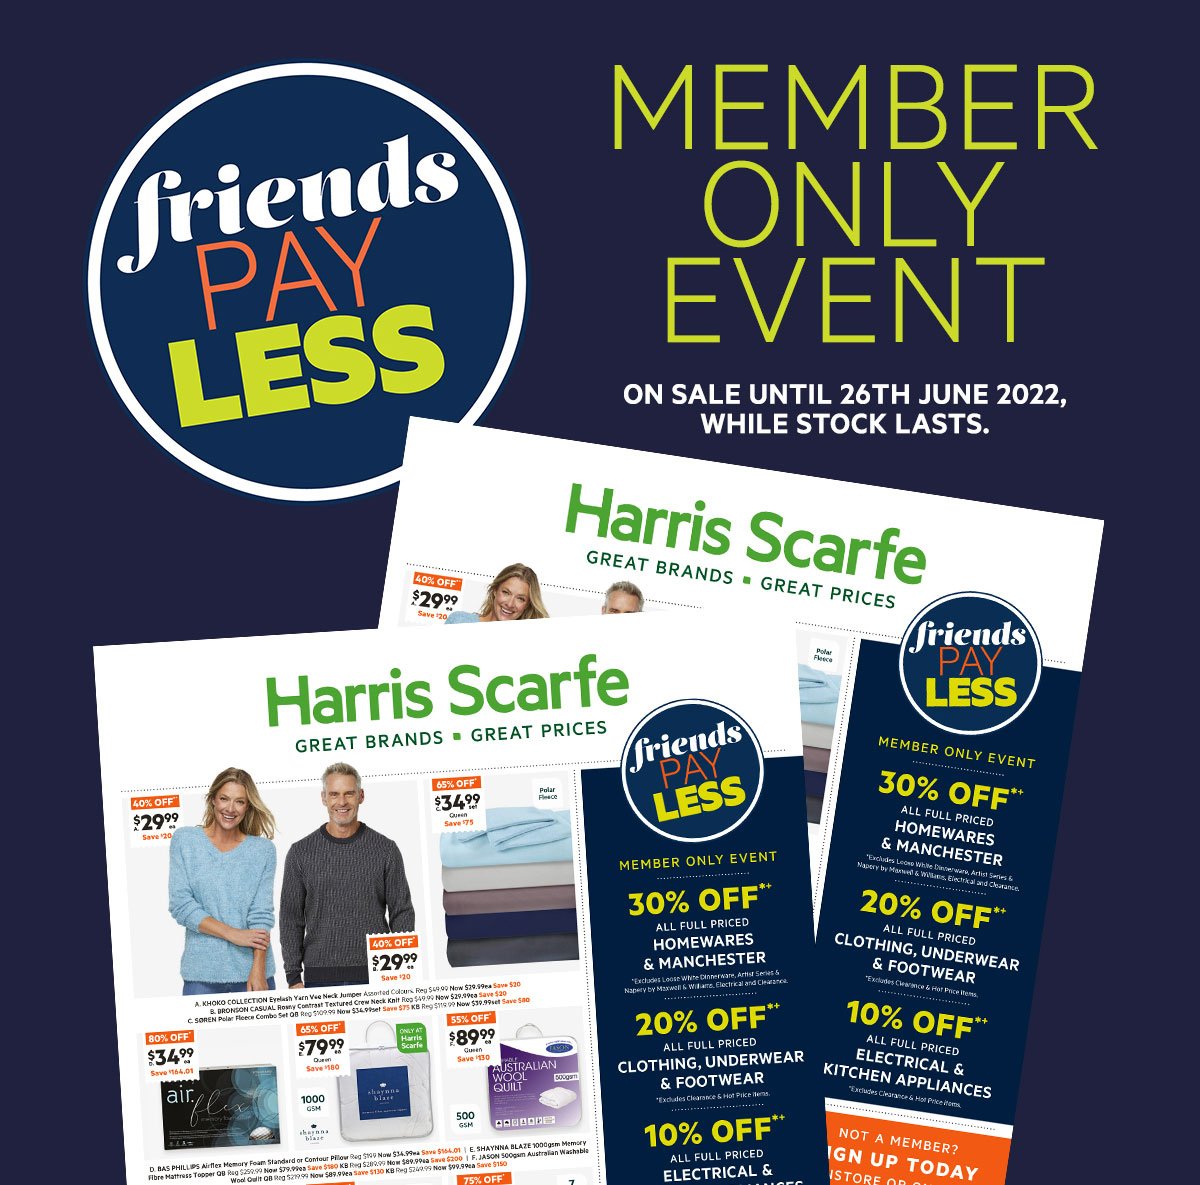 FRIENDS PAY LESS MEMBER EVENT